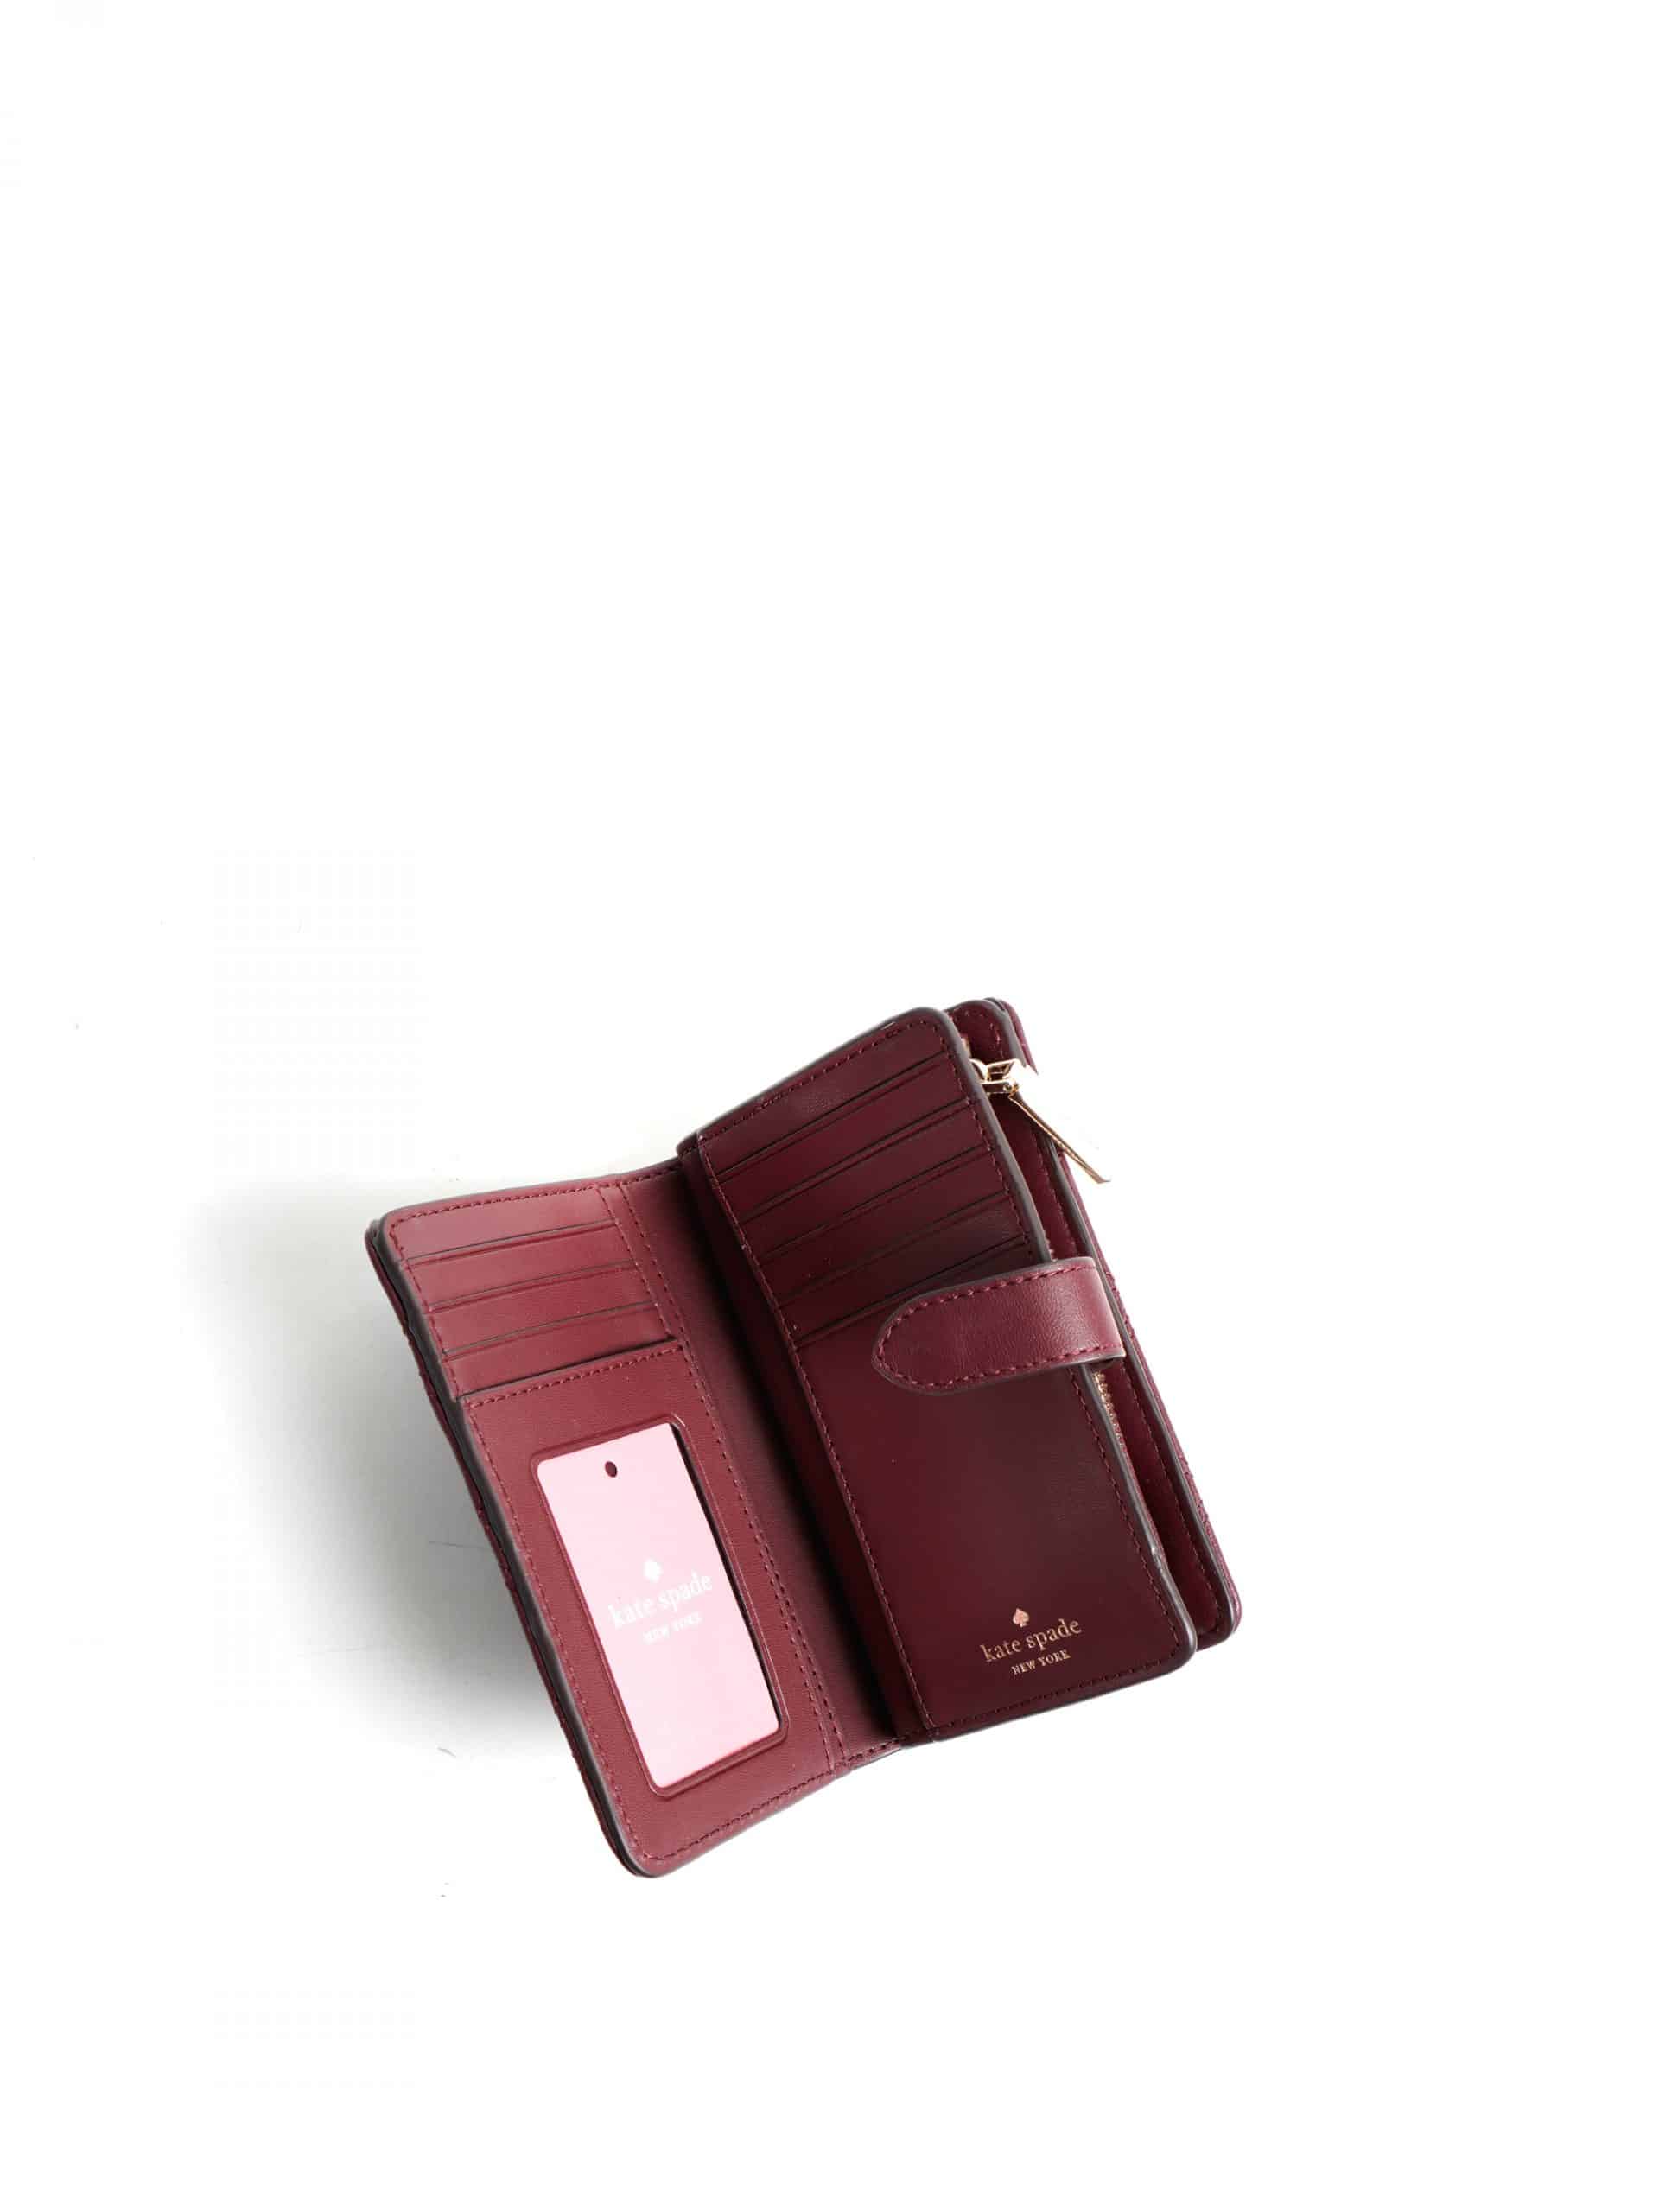 Kate Spade Staci compact bifold wallet cherrywood 